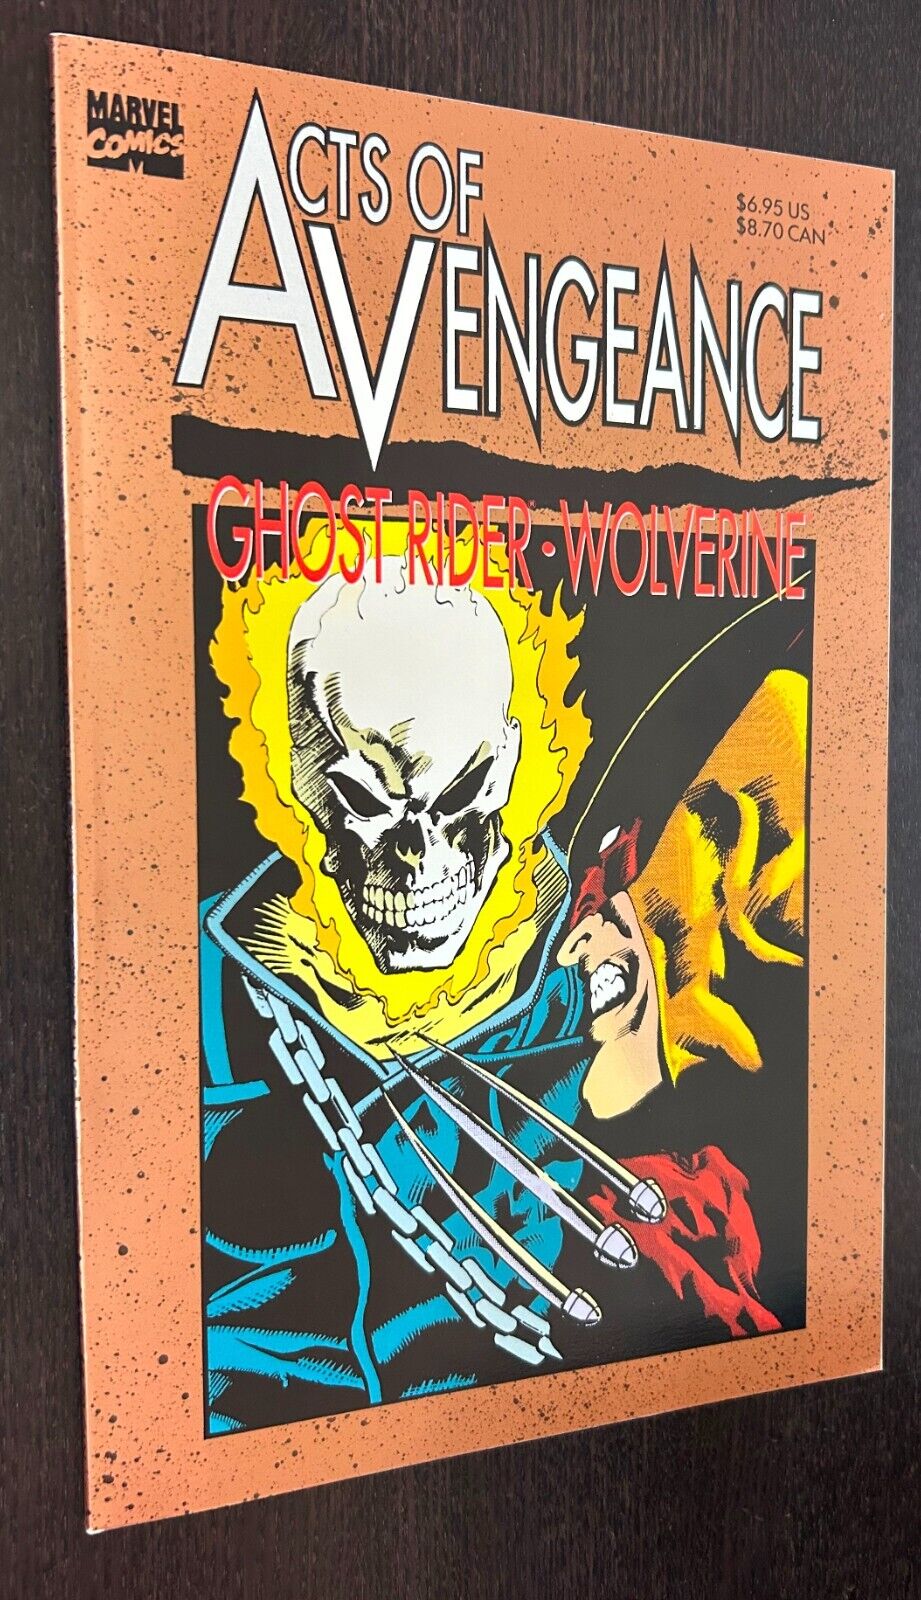 ACTS OF VENGEANCE Ghost Rider Wolverine GN #1 (Marvel Comics 1994) -- 1st Print